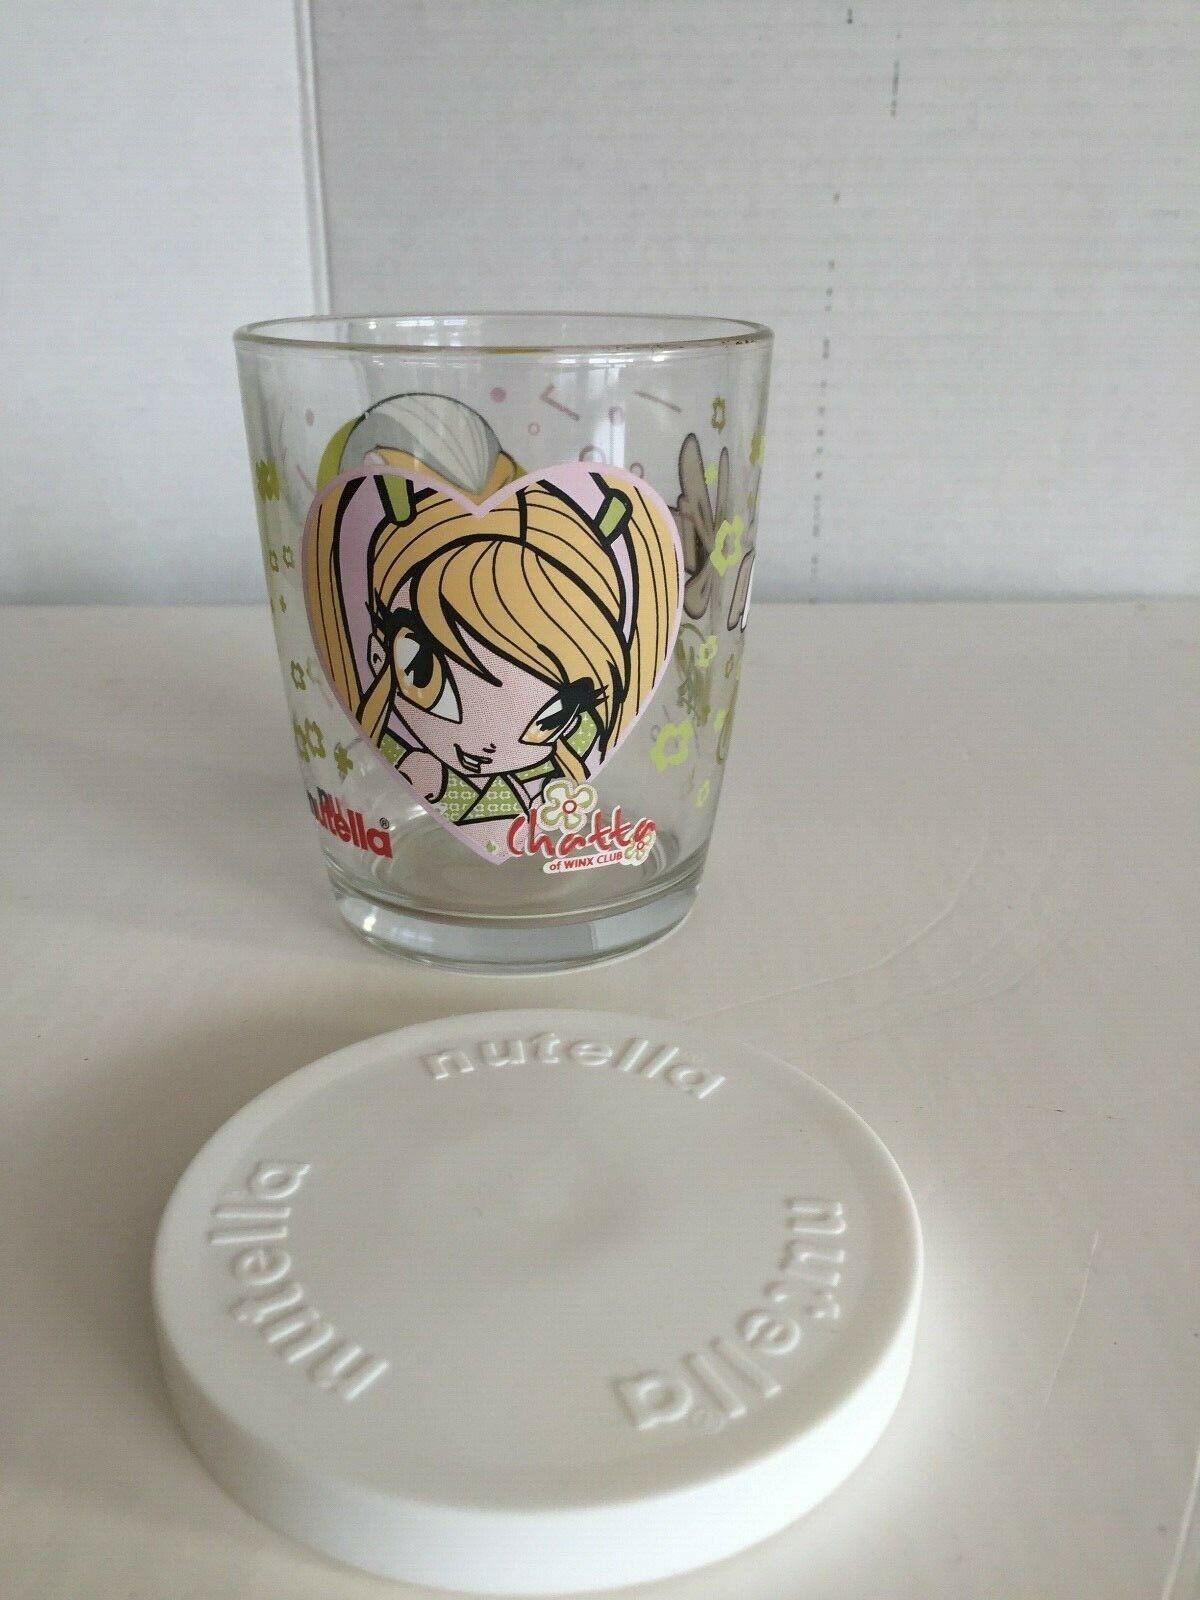 Made Italy Nutella Chatta Winx Club Drinking Glass & Lid, Chatta Cup Pixie Magic